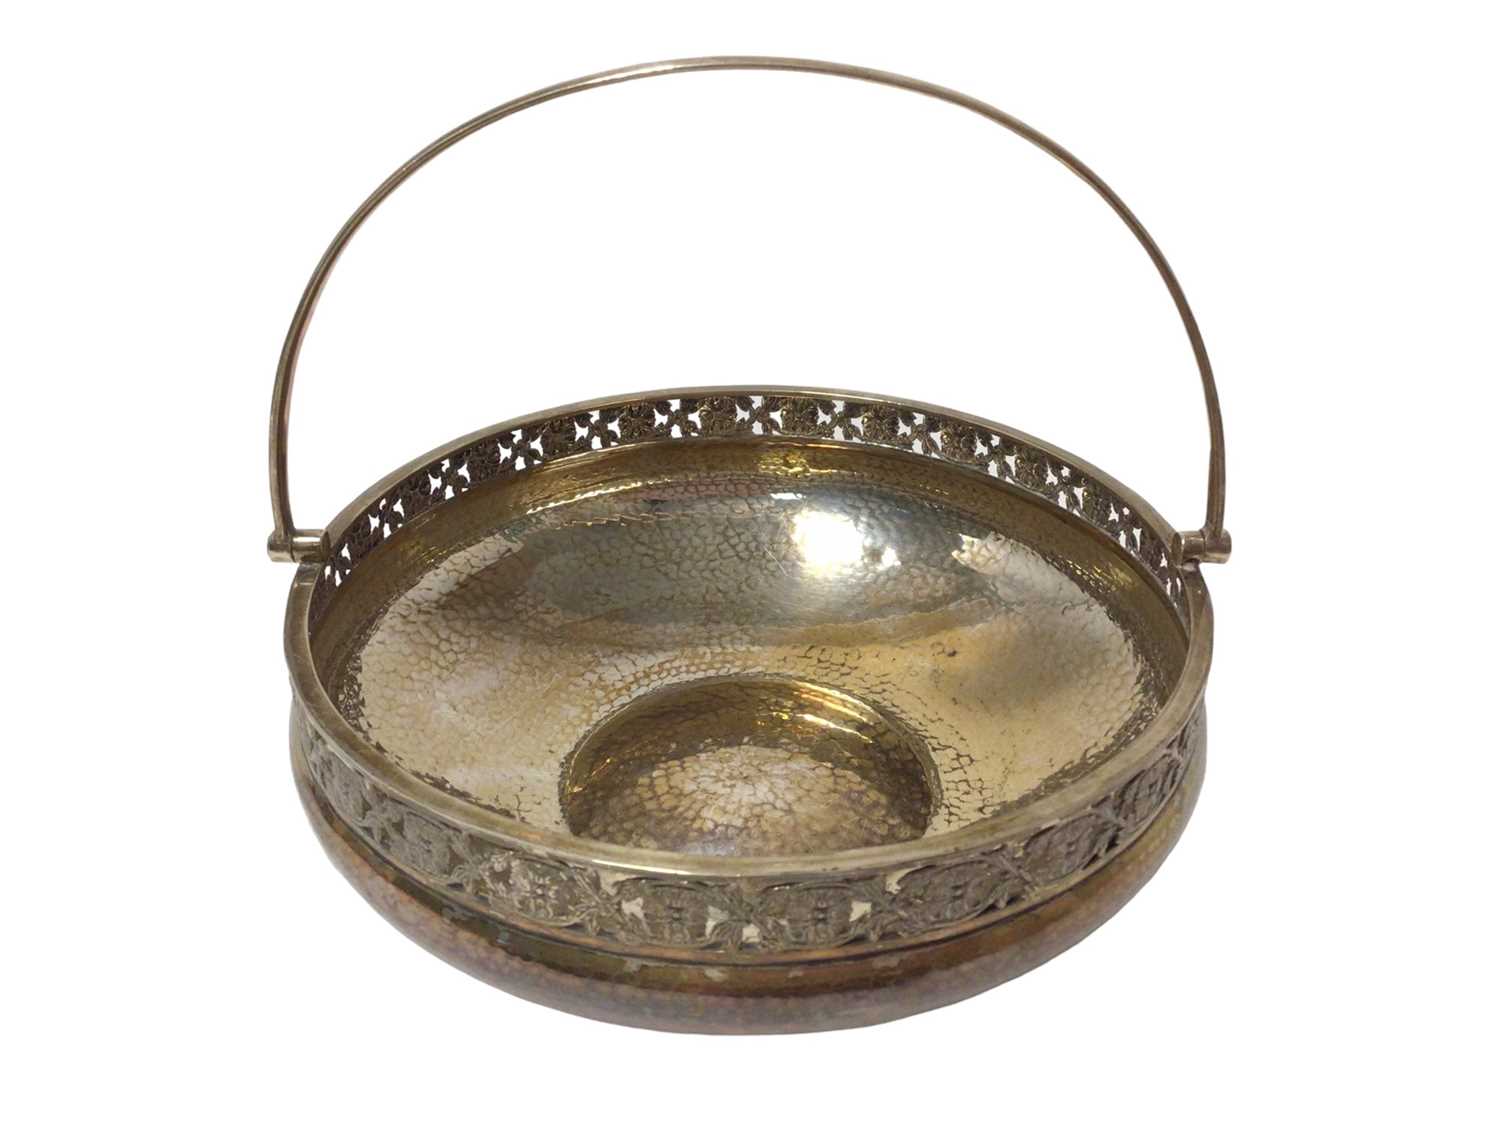 1920s Arts & Crafts style silver basket